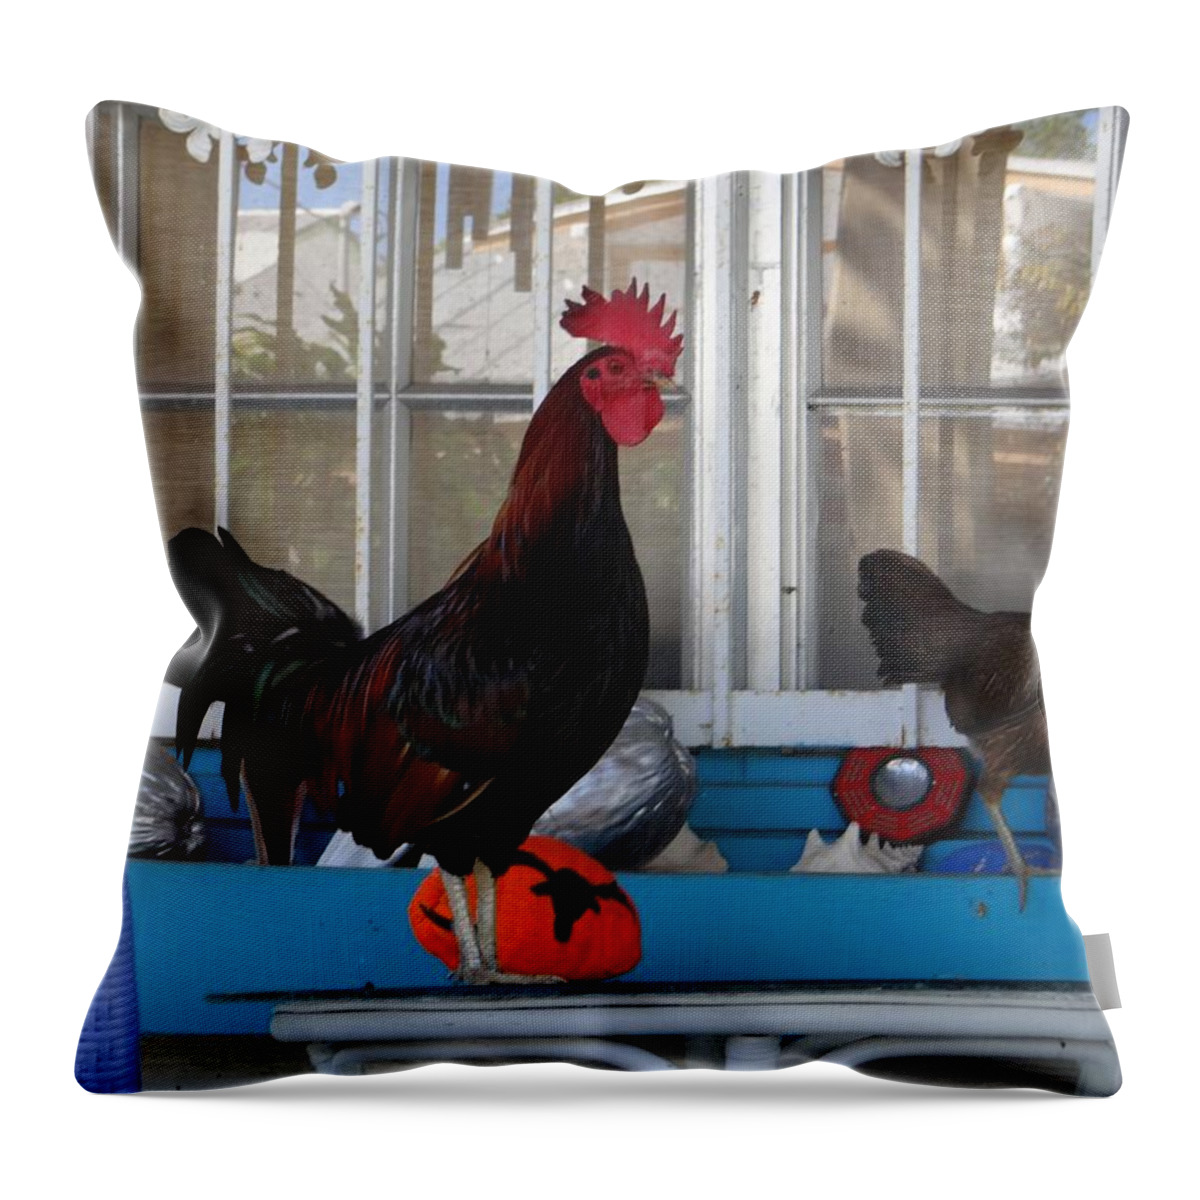 Key West Throw Pillow featuring the photograph Key West Rooster by Keith Stokes